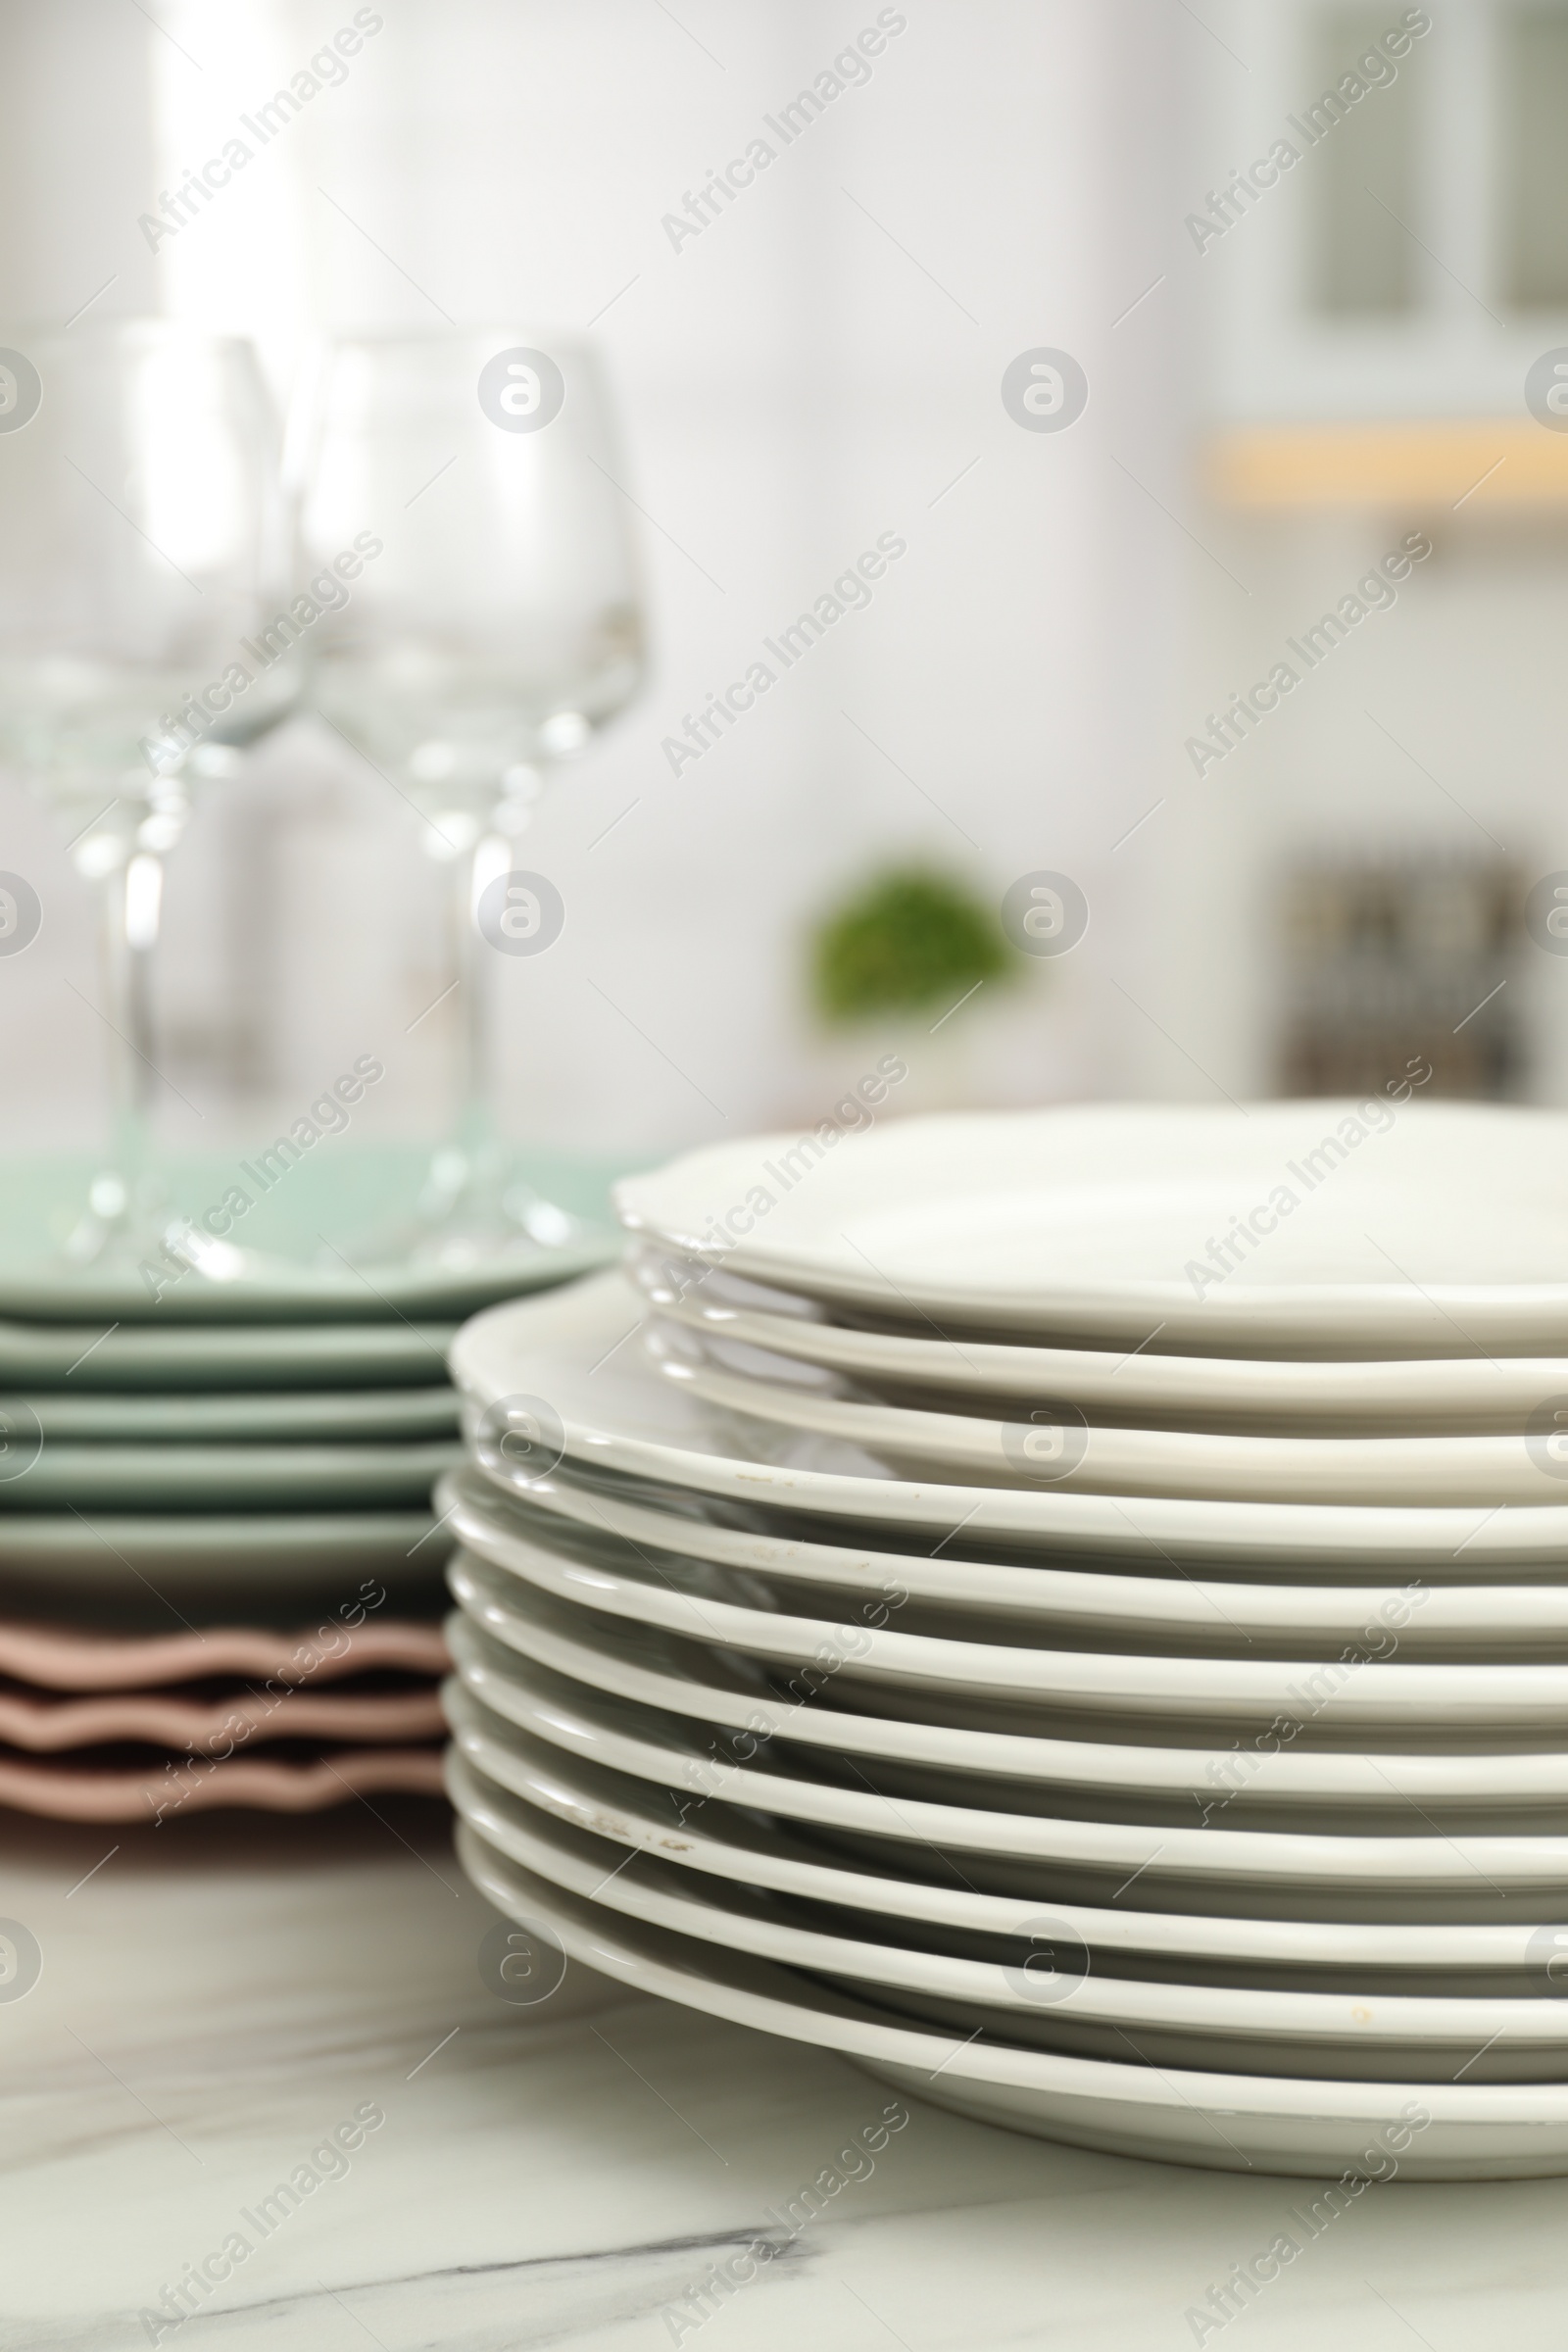 Photo of Clean plates and glasses on white marble table in kitchen